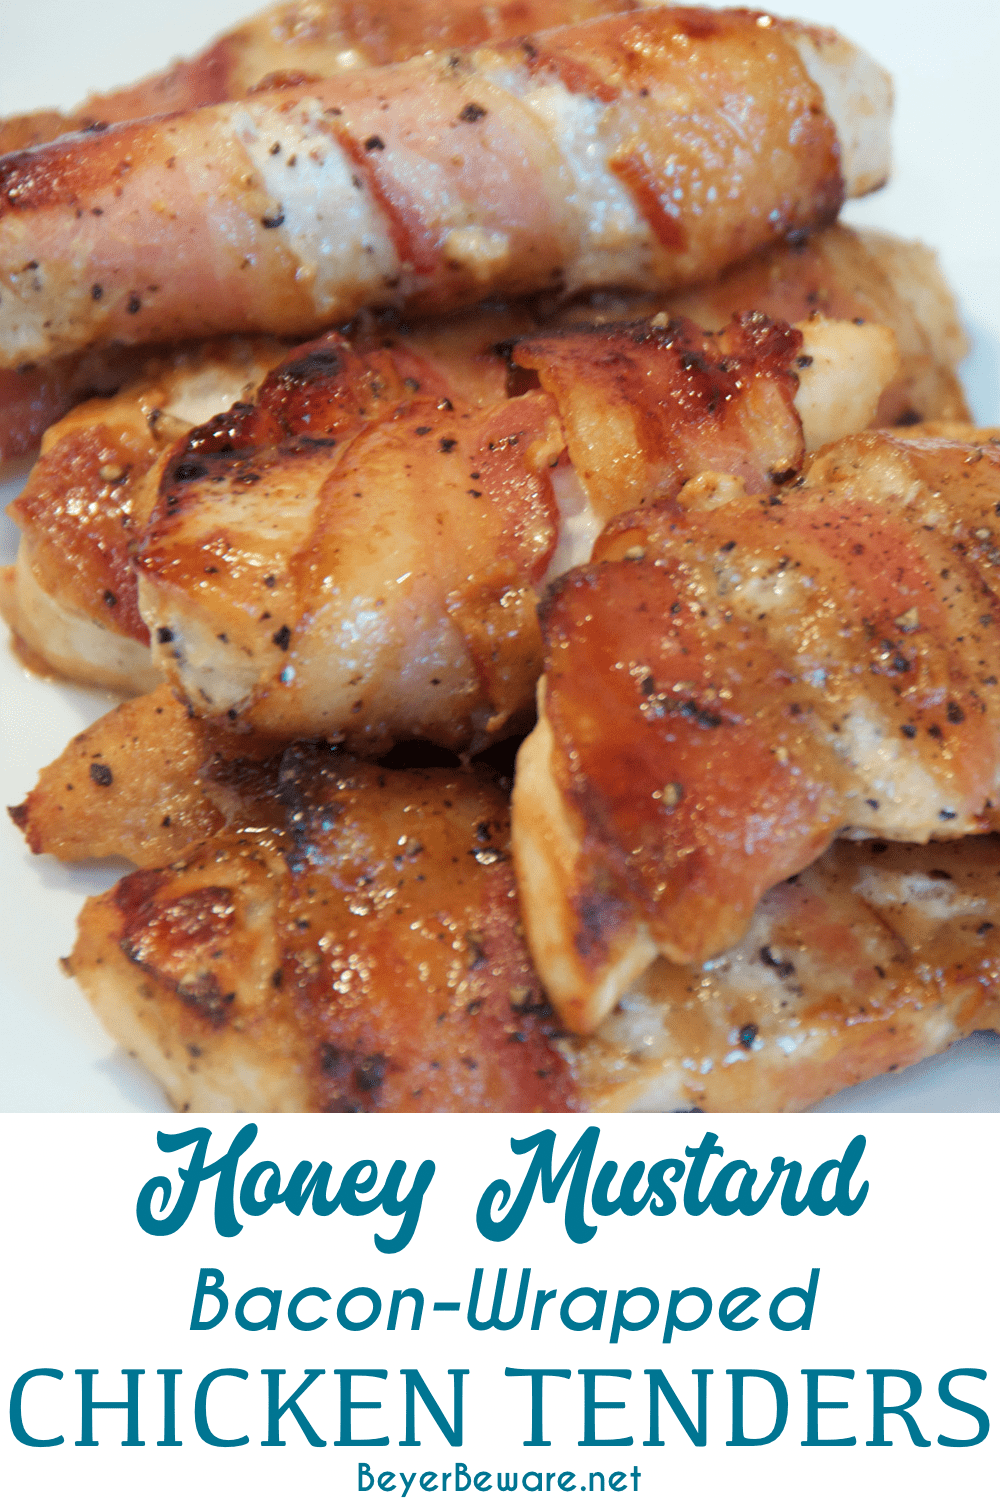 Honey mustard bacon wrapped chicken tenders are an easy chicken recipe made with a simple homemade honey mustard sauce and then baked for a perfect non-breaded chicken tenders option.